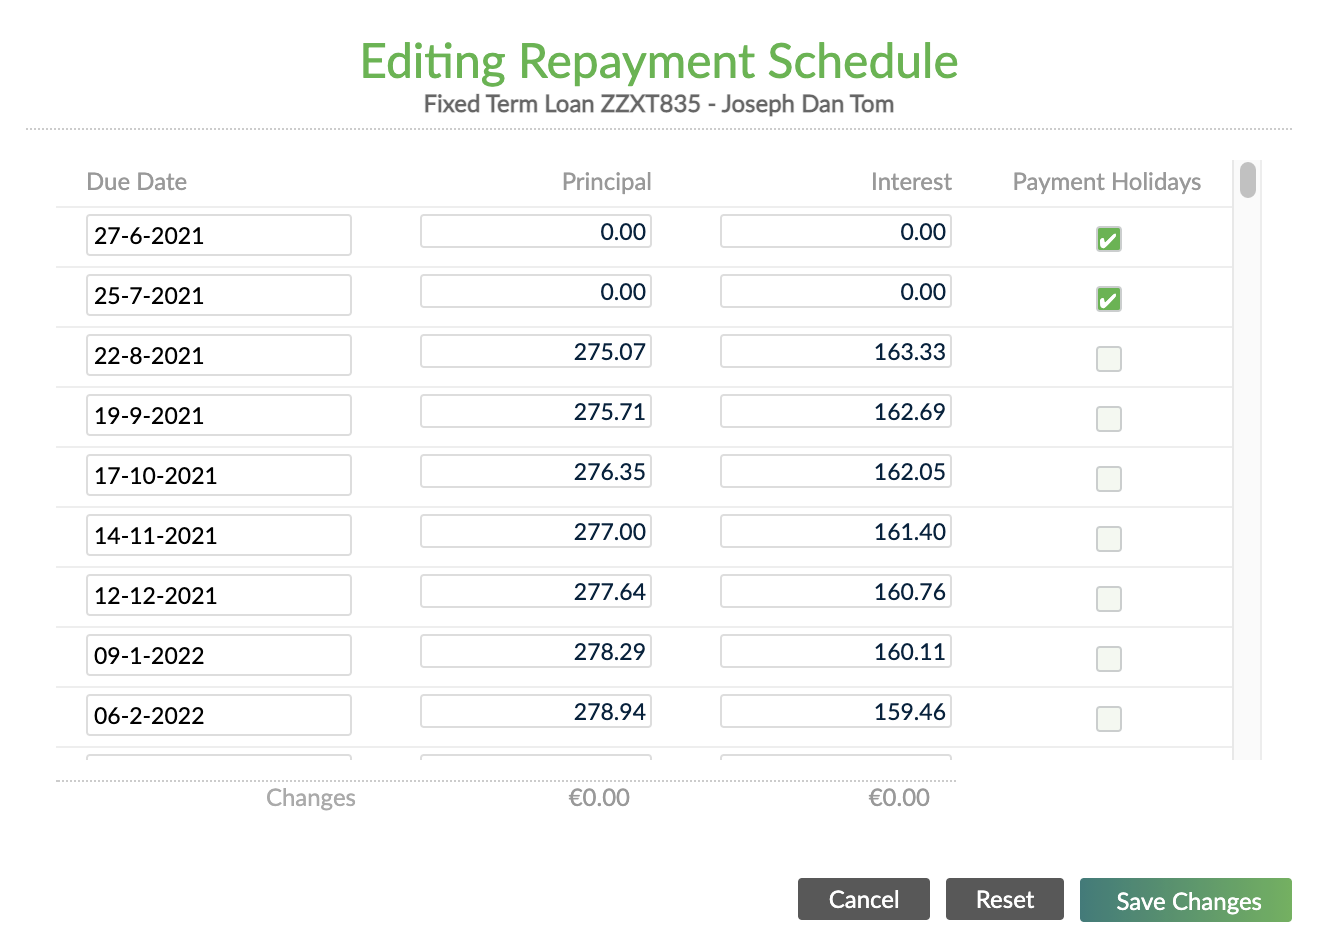 Configure Payment Holiday via Edit Schedule at Loan Account Level